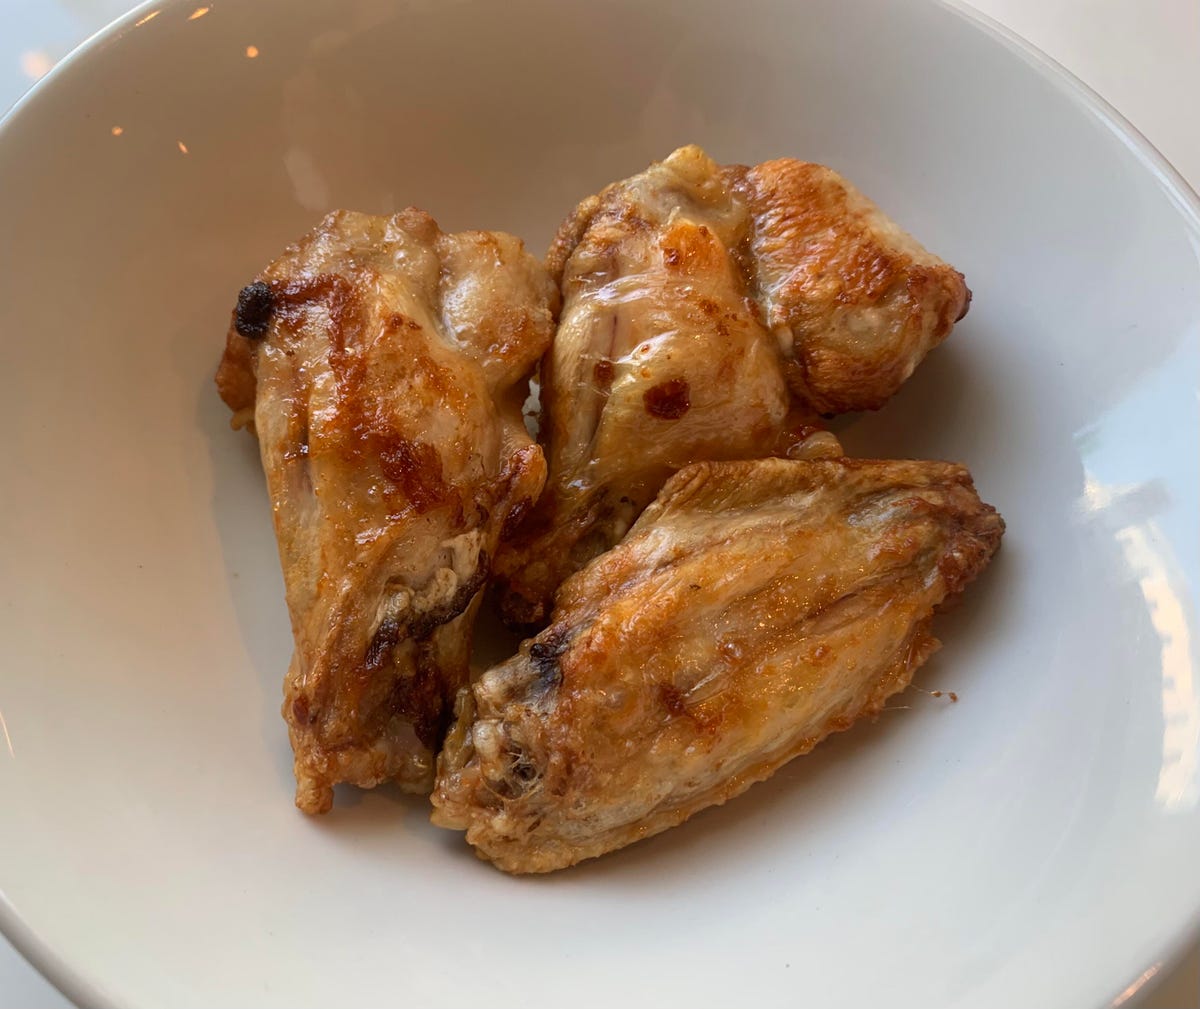 Chicken wings in a bowl